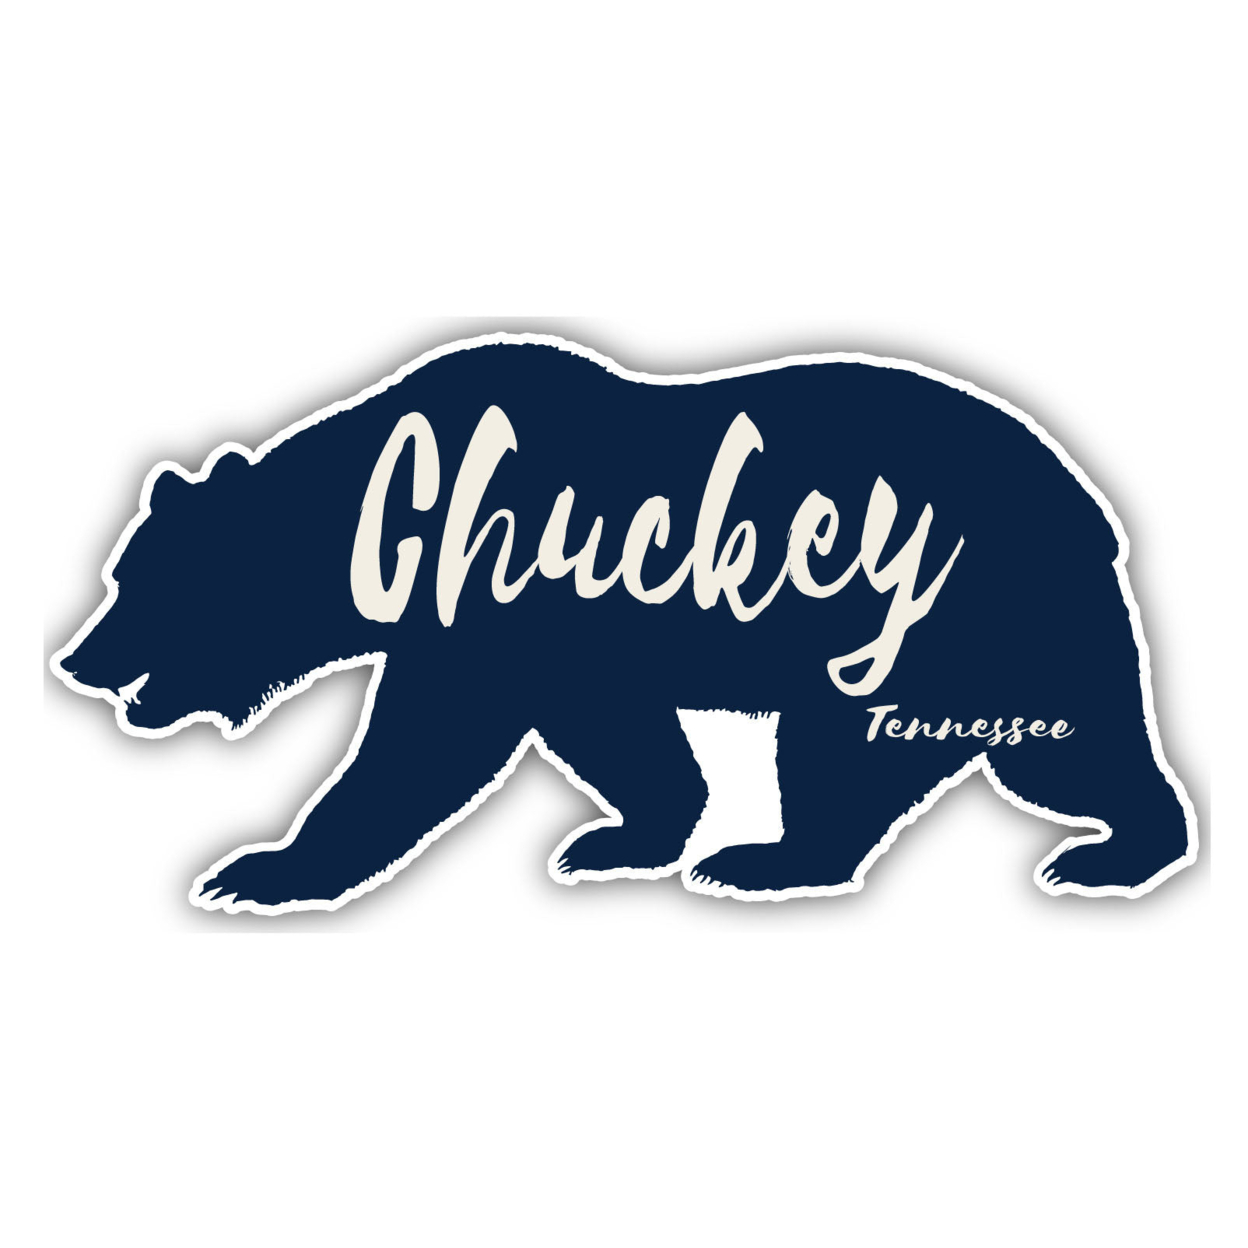 Chuckey Tennessee Souvenir Decorative Stickers (Choose Theme And Size) - 4-Pack, 2-Inch, Bear